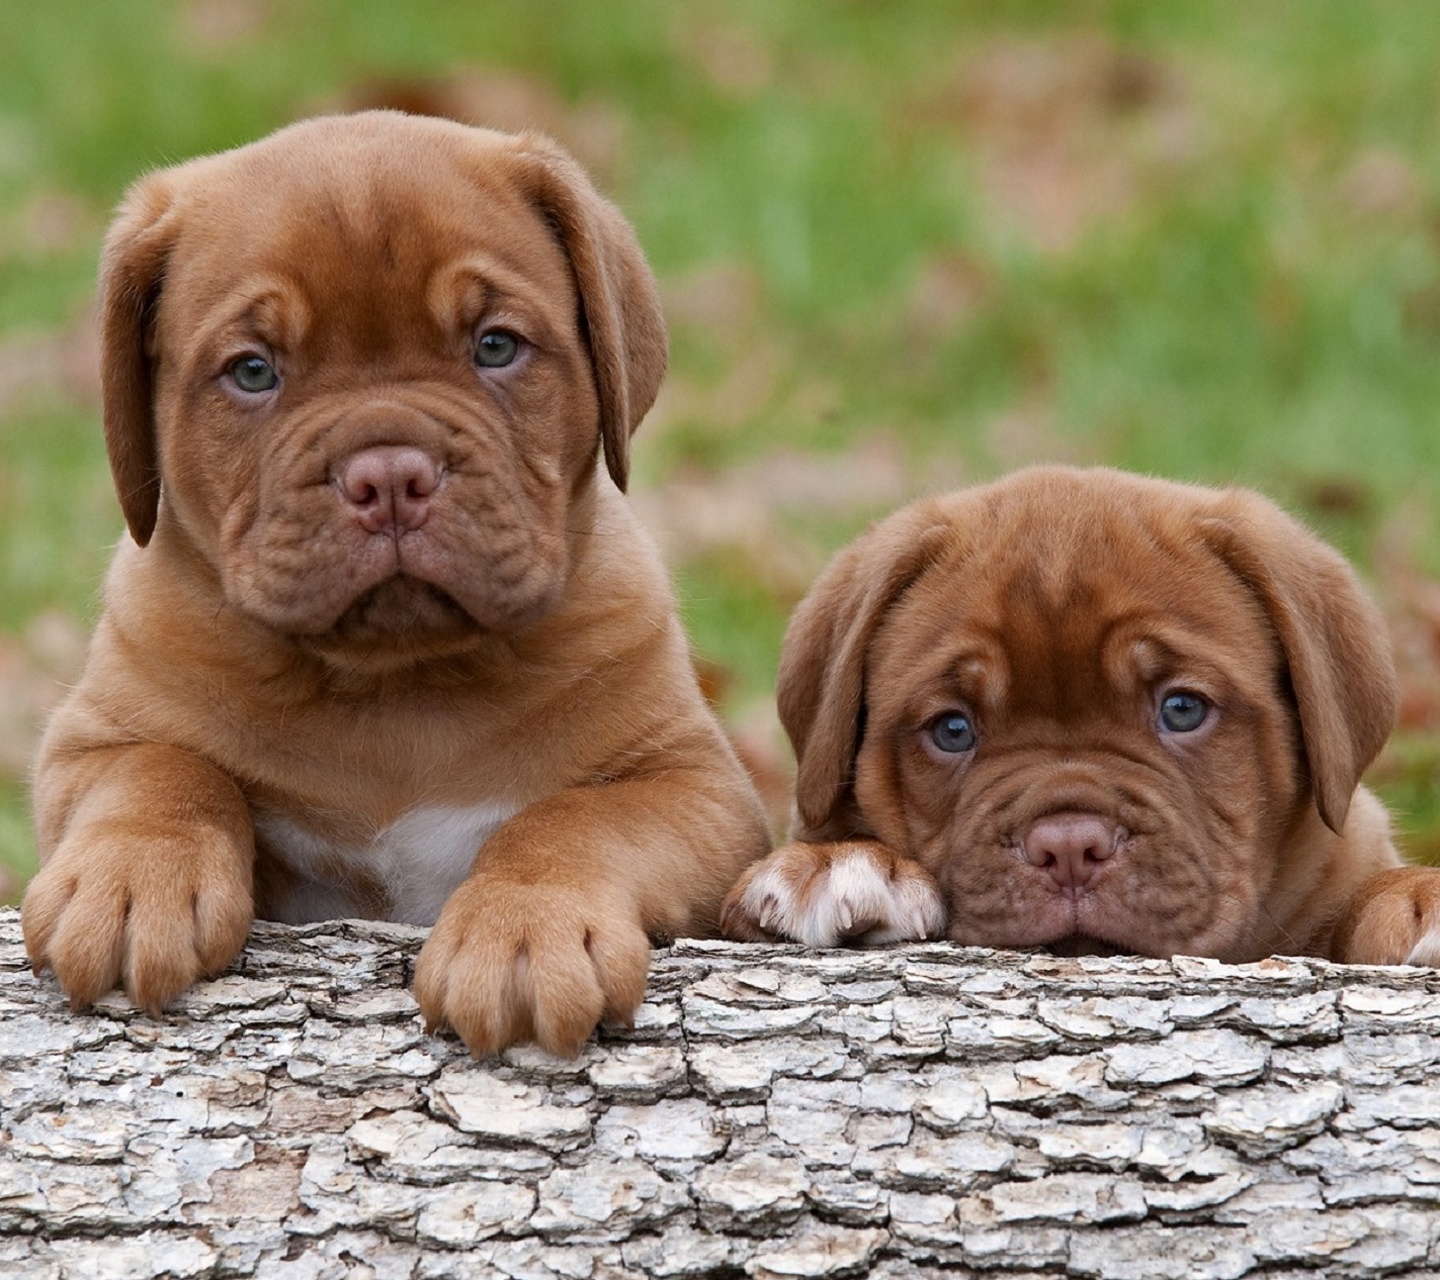 Free Cute Puppies Wallpaper Background for Mobiles ...
 Free Cute Wallpapers For Mobile